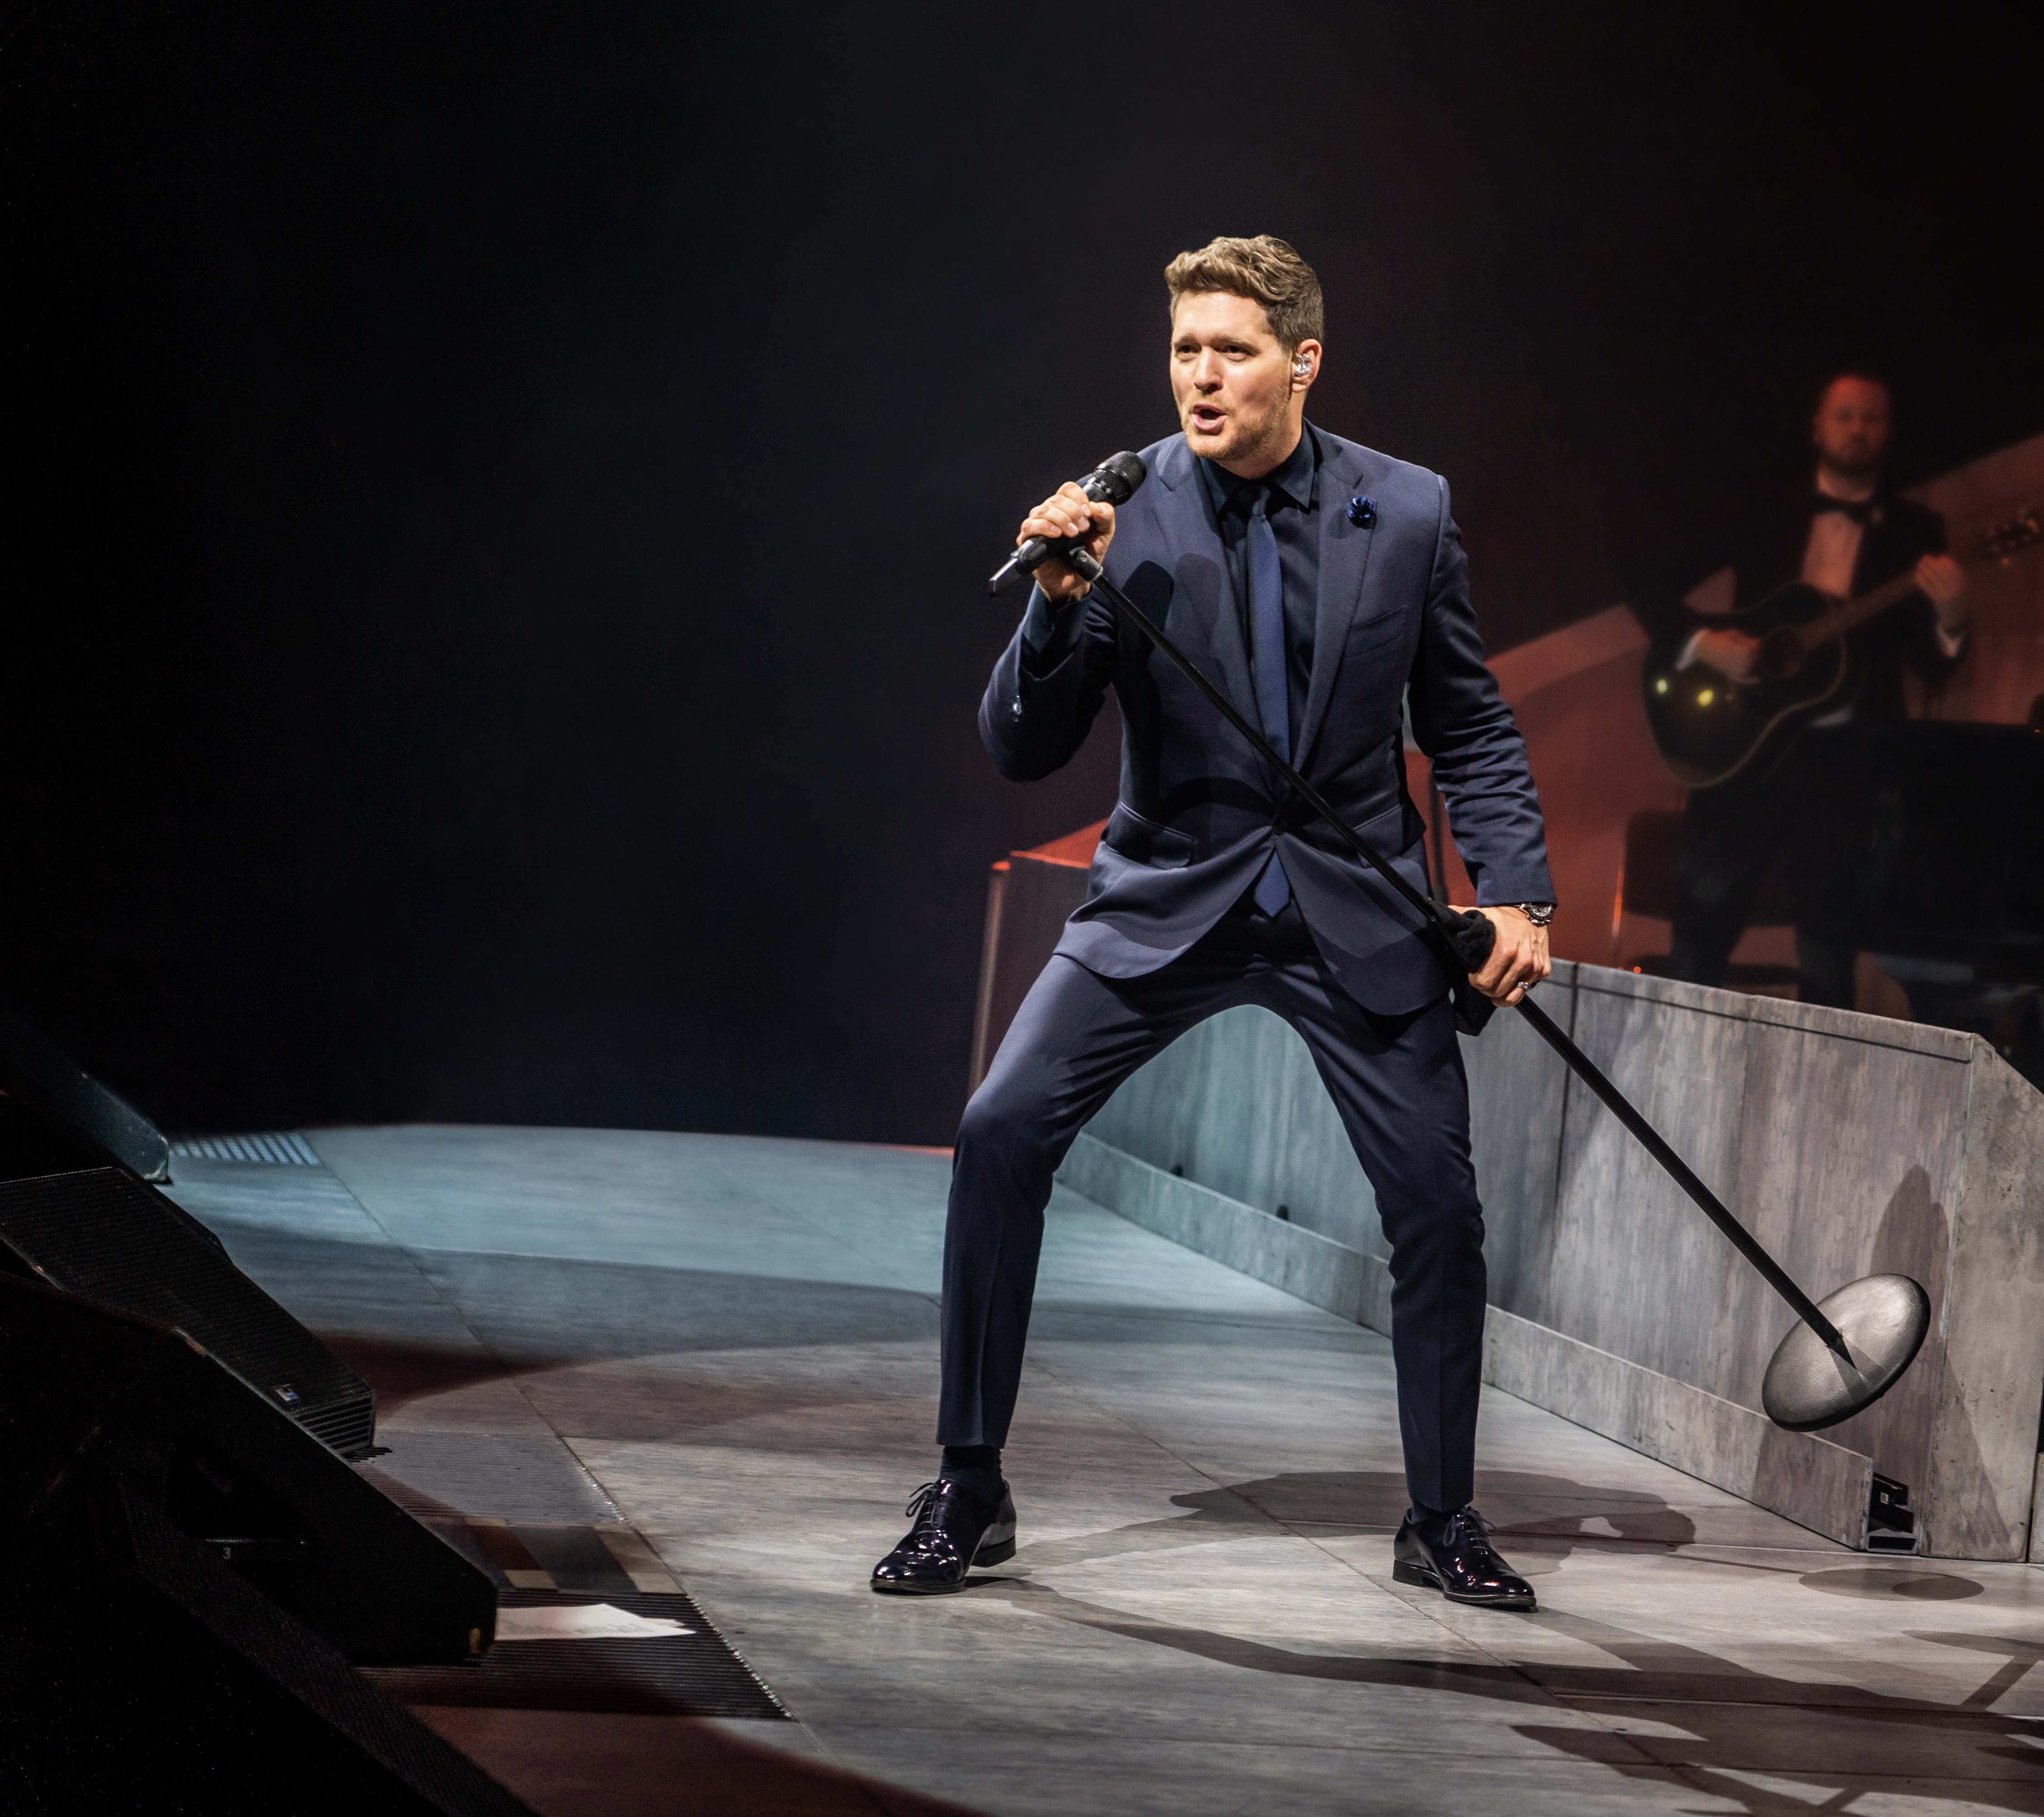 Michael Bublé – Higher Tour 2023 in concert in Royal Arena 14. marts. 23